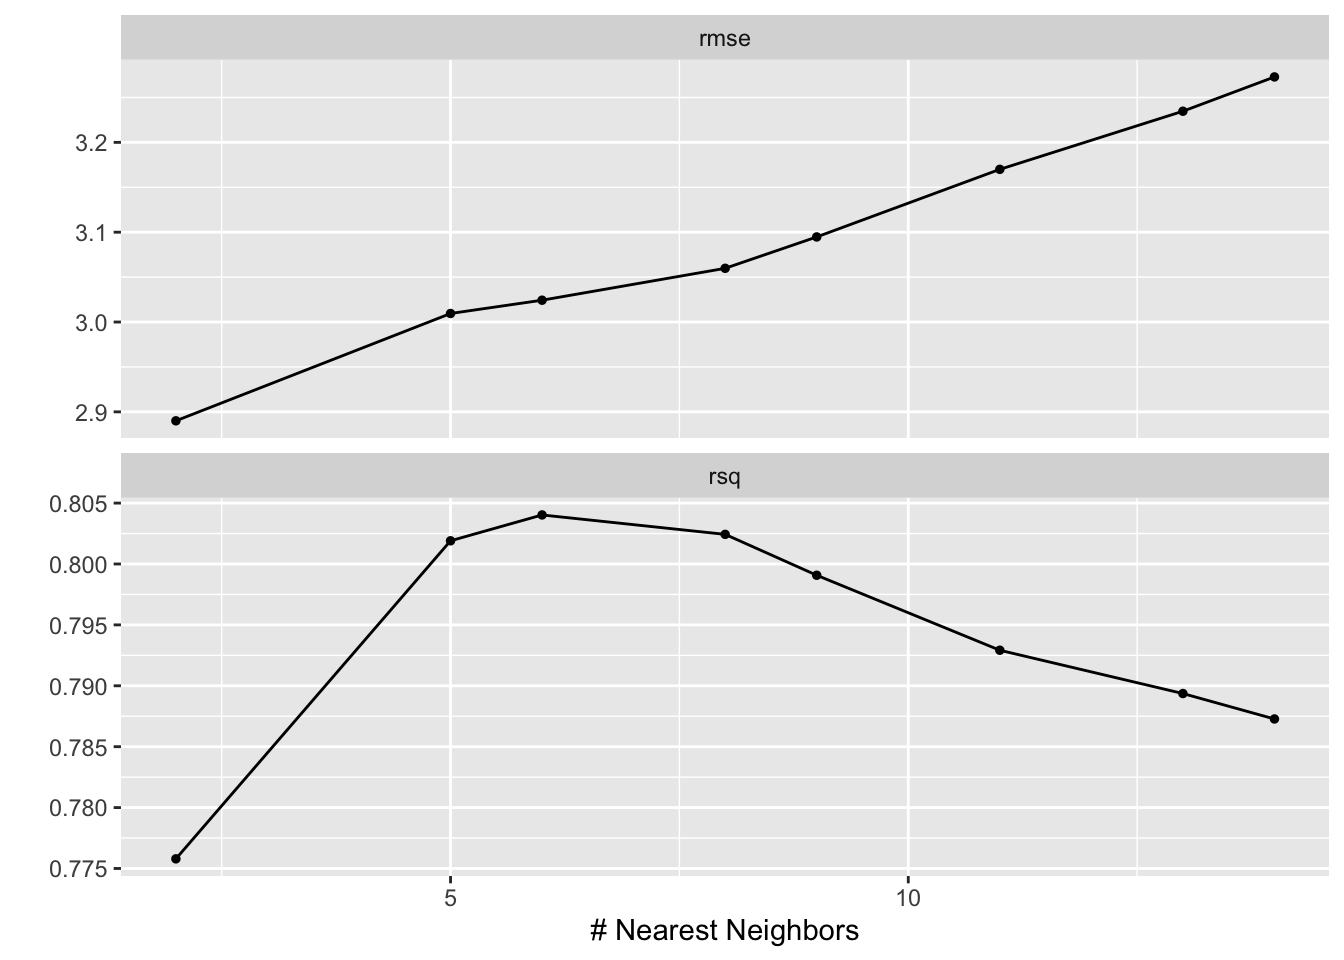 A ggplot2 line plot. The number of neighbors, from 1 to 14, is on the x axis, and the error metric is on the y axis. The plot is faceted by error metric, with root mean squared error showing consistently higher error with more neighbors, and the R squared showing an optimal number of neighbors near 6.